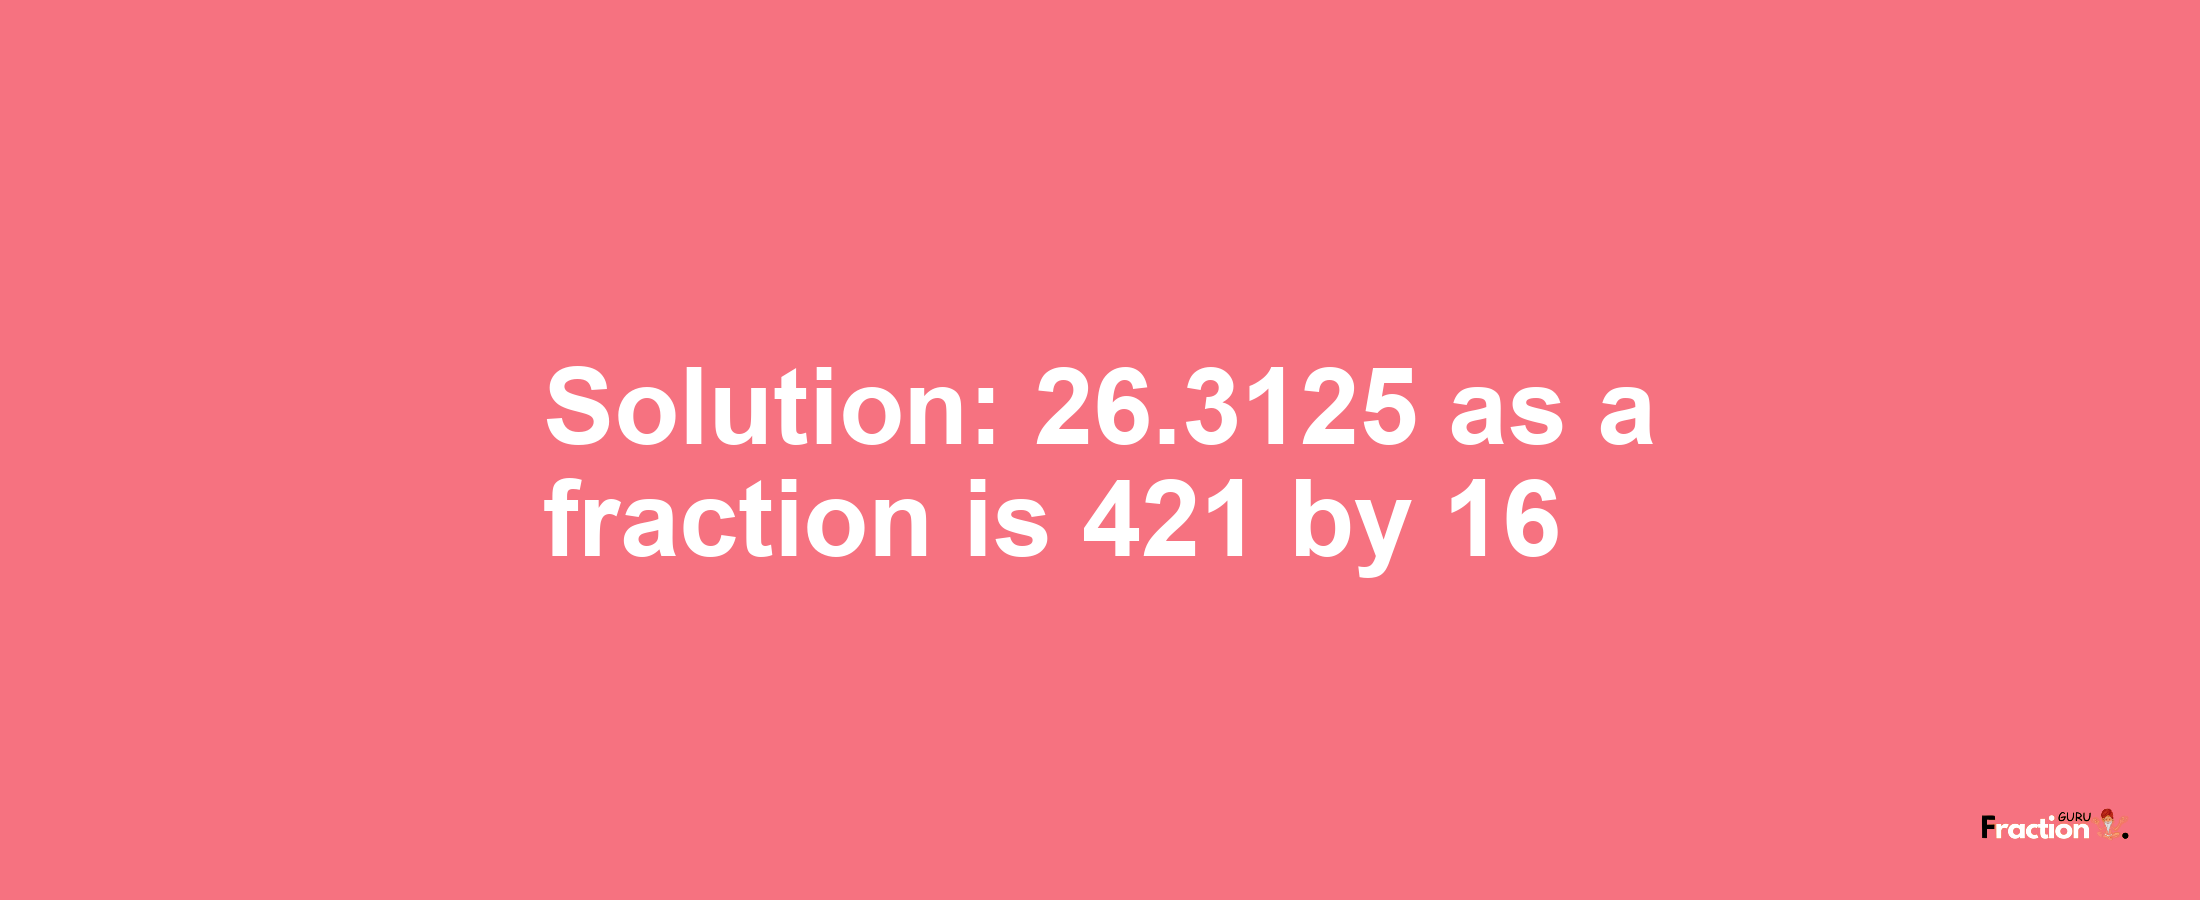 Solution:26.3125 as a fraction is 421/16